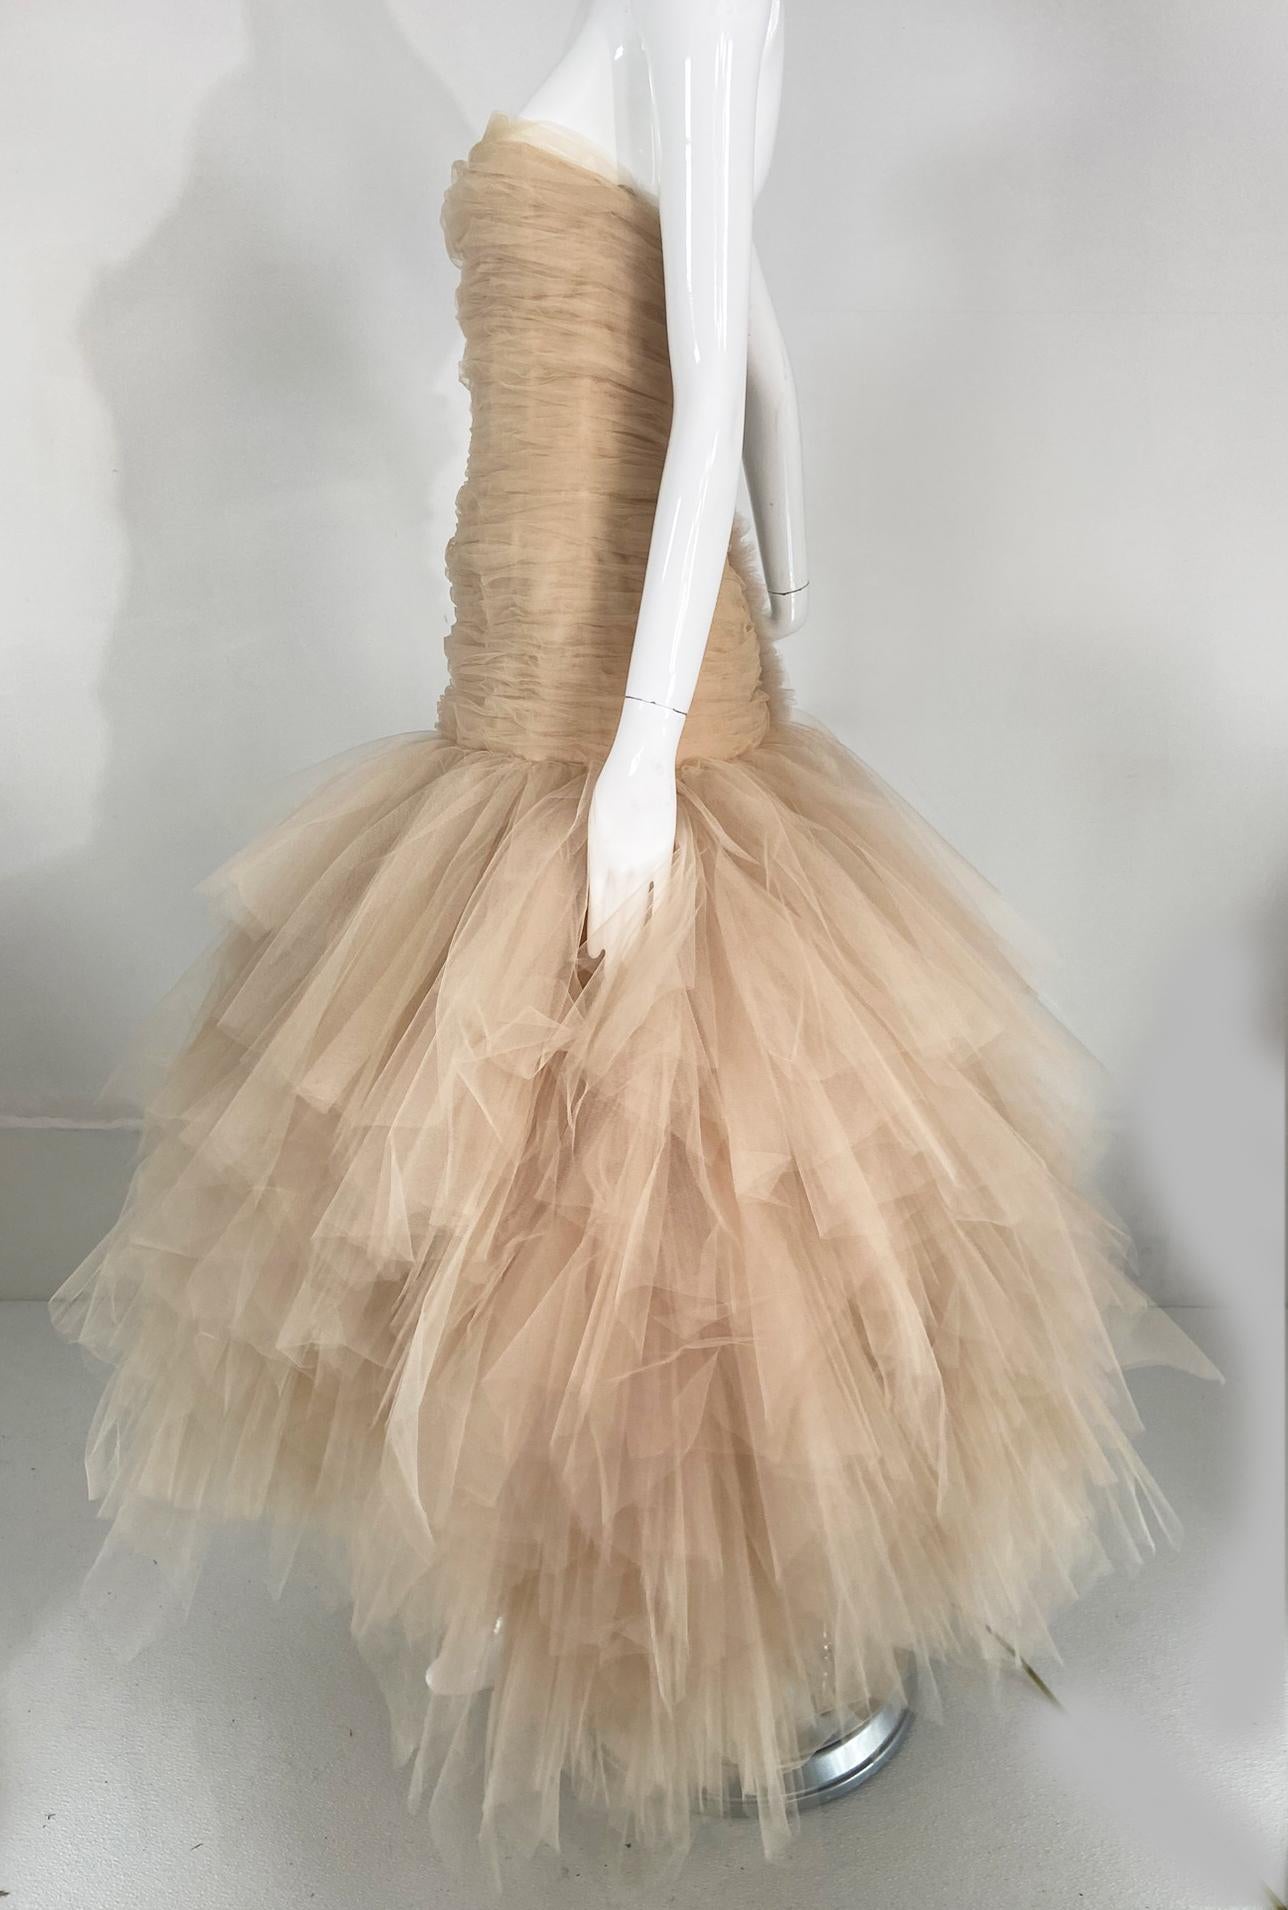 Oscar de la Renta Runway Champagne Layered Tulle Strapless Gown 2007  6